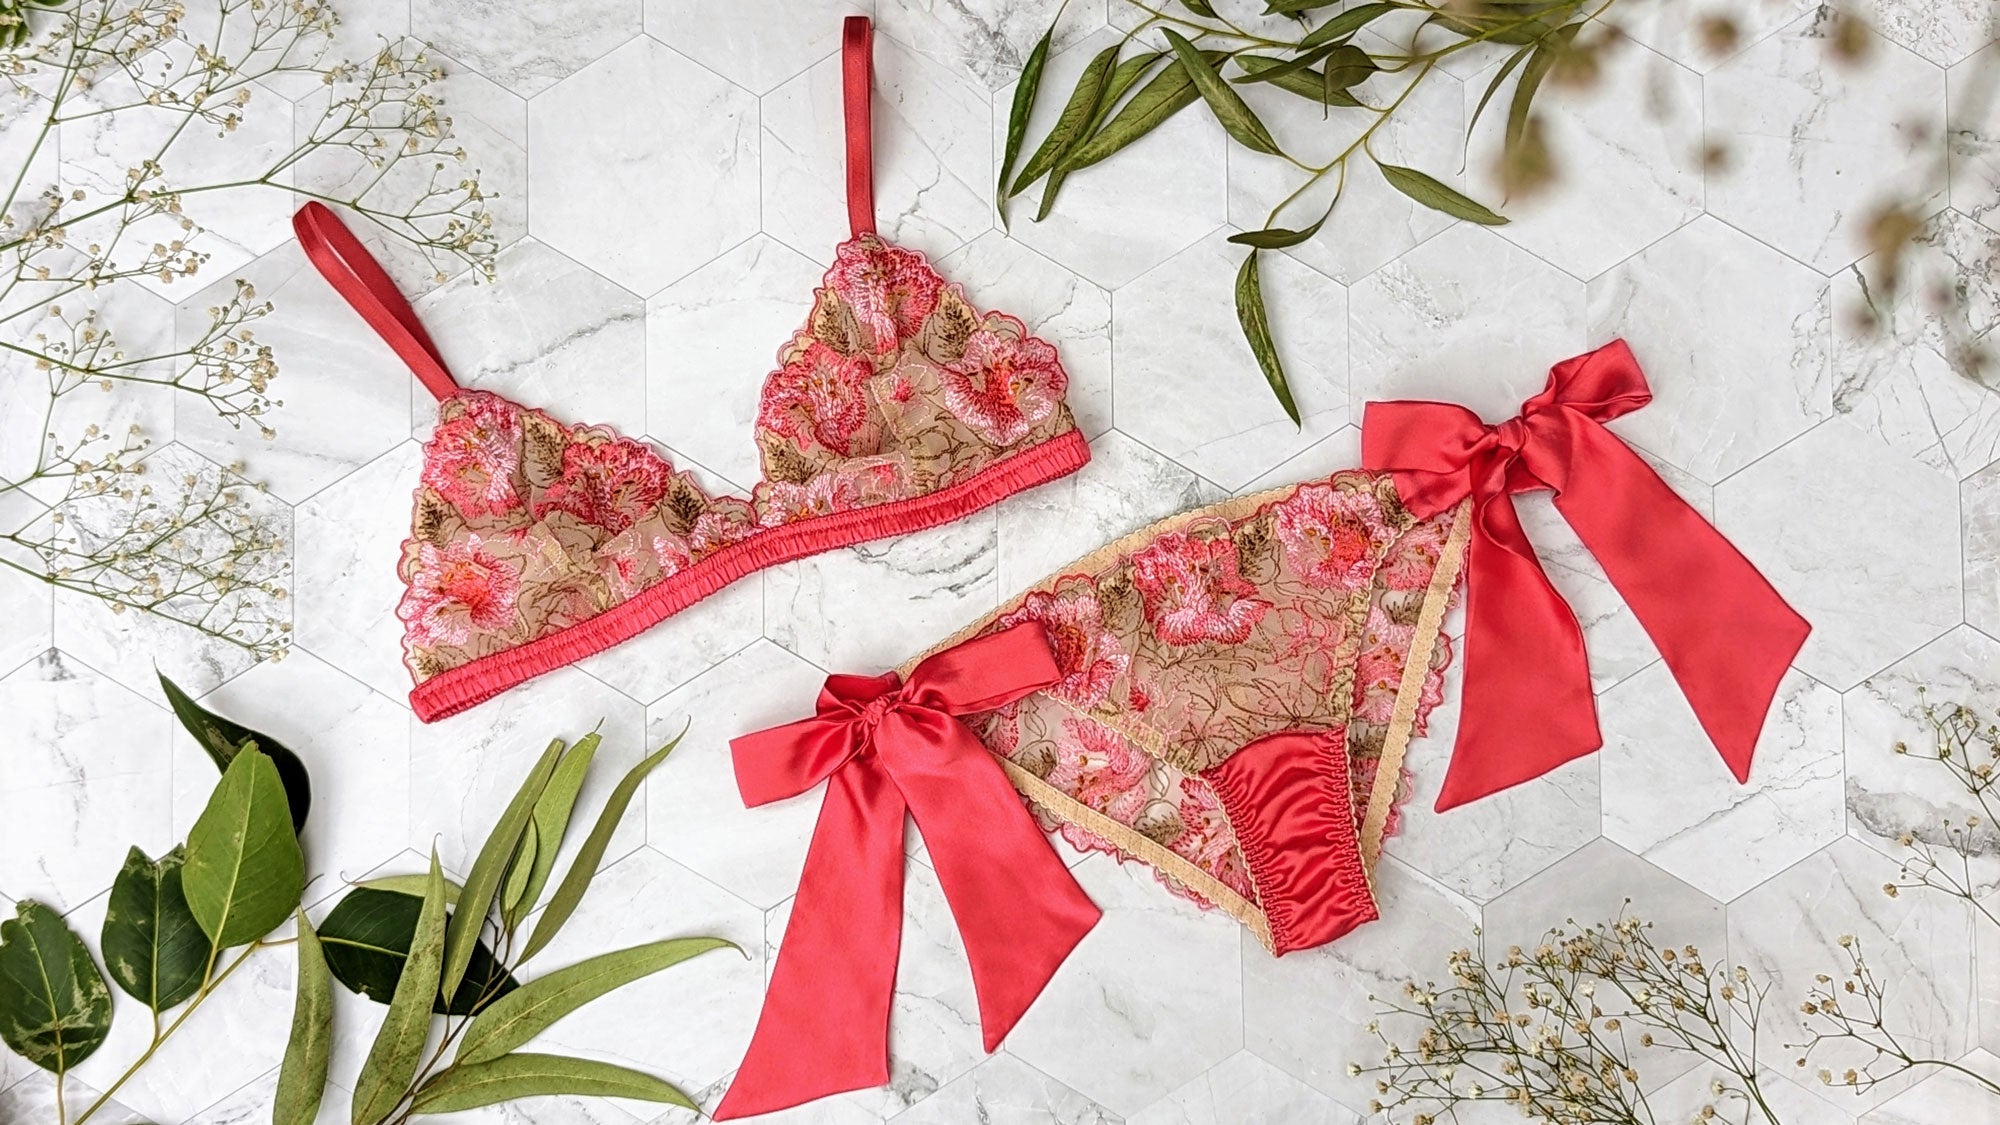 Luxury lingerie set with embroidered bralette, garter belt, and thong panties with floral trims